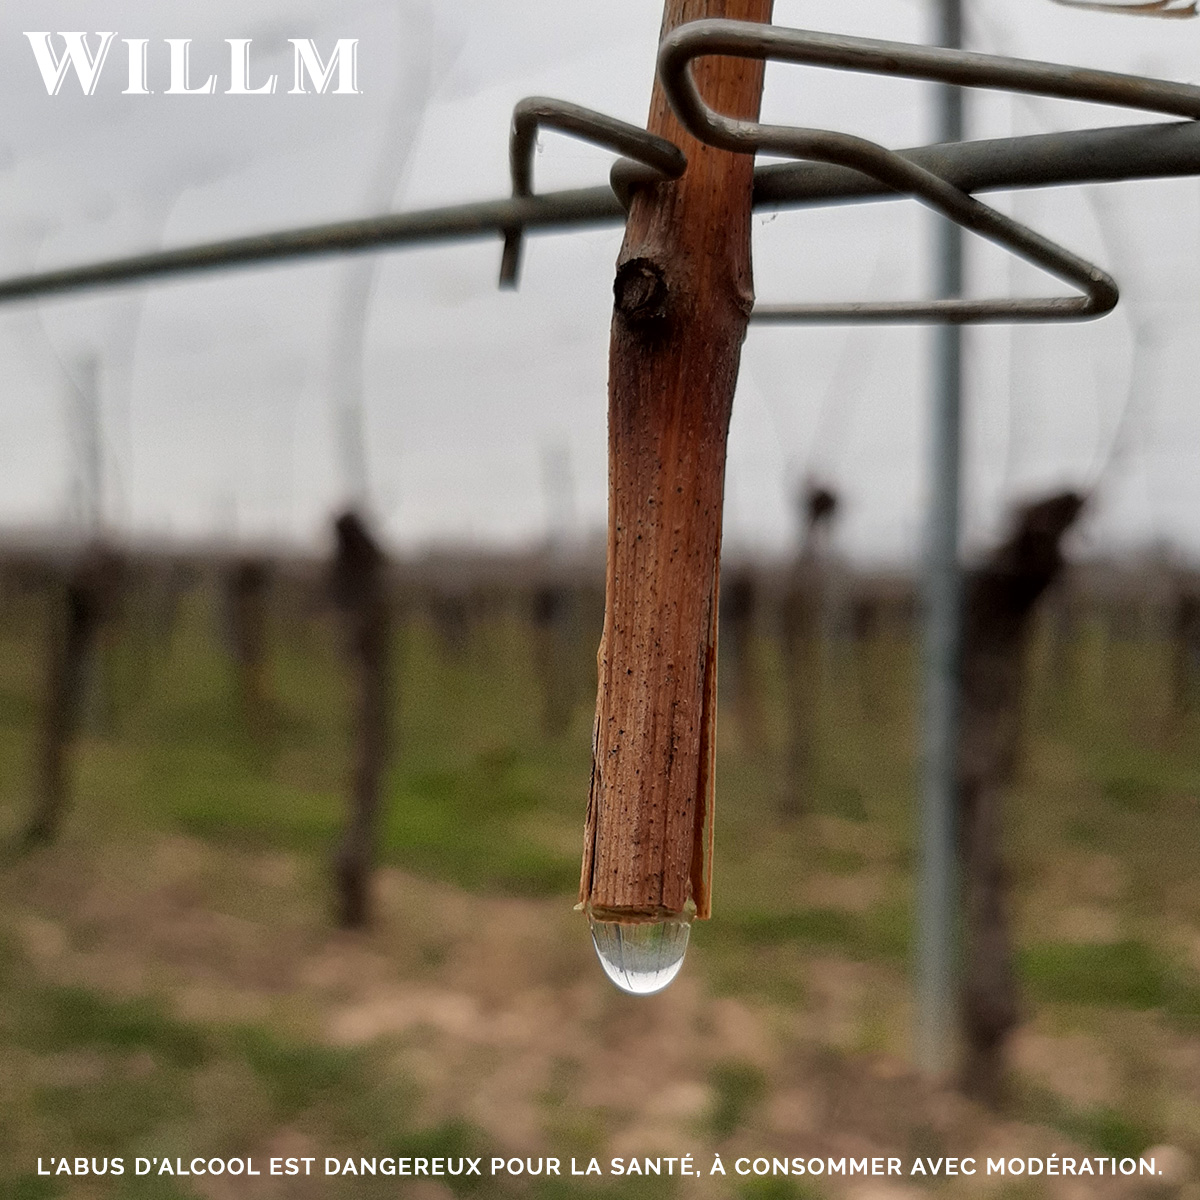 As the #warmer weather approaches, we can see the vines weeping! The vine wakes up from its winter dormancy and as the sap begins to circulate, the vine “weeps” to announce the start of a new growing season. #drinkalsace #alsacerocks #alsacewillm #willm #vines #winelovers